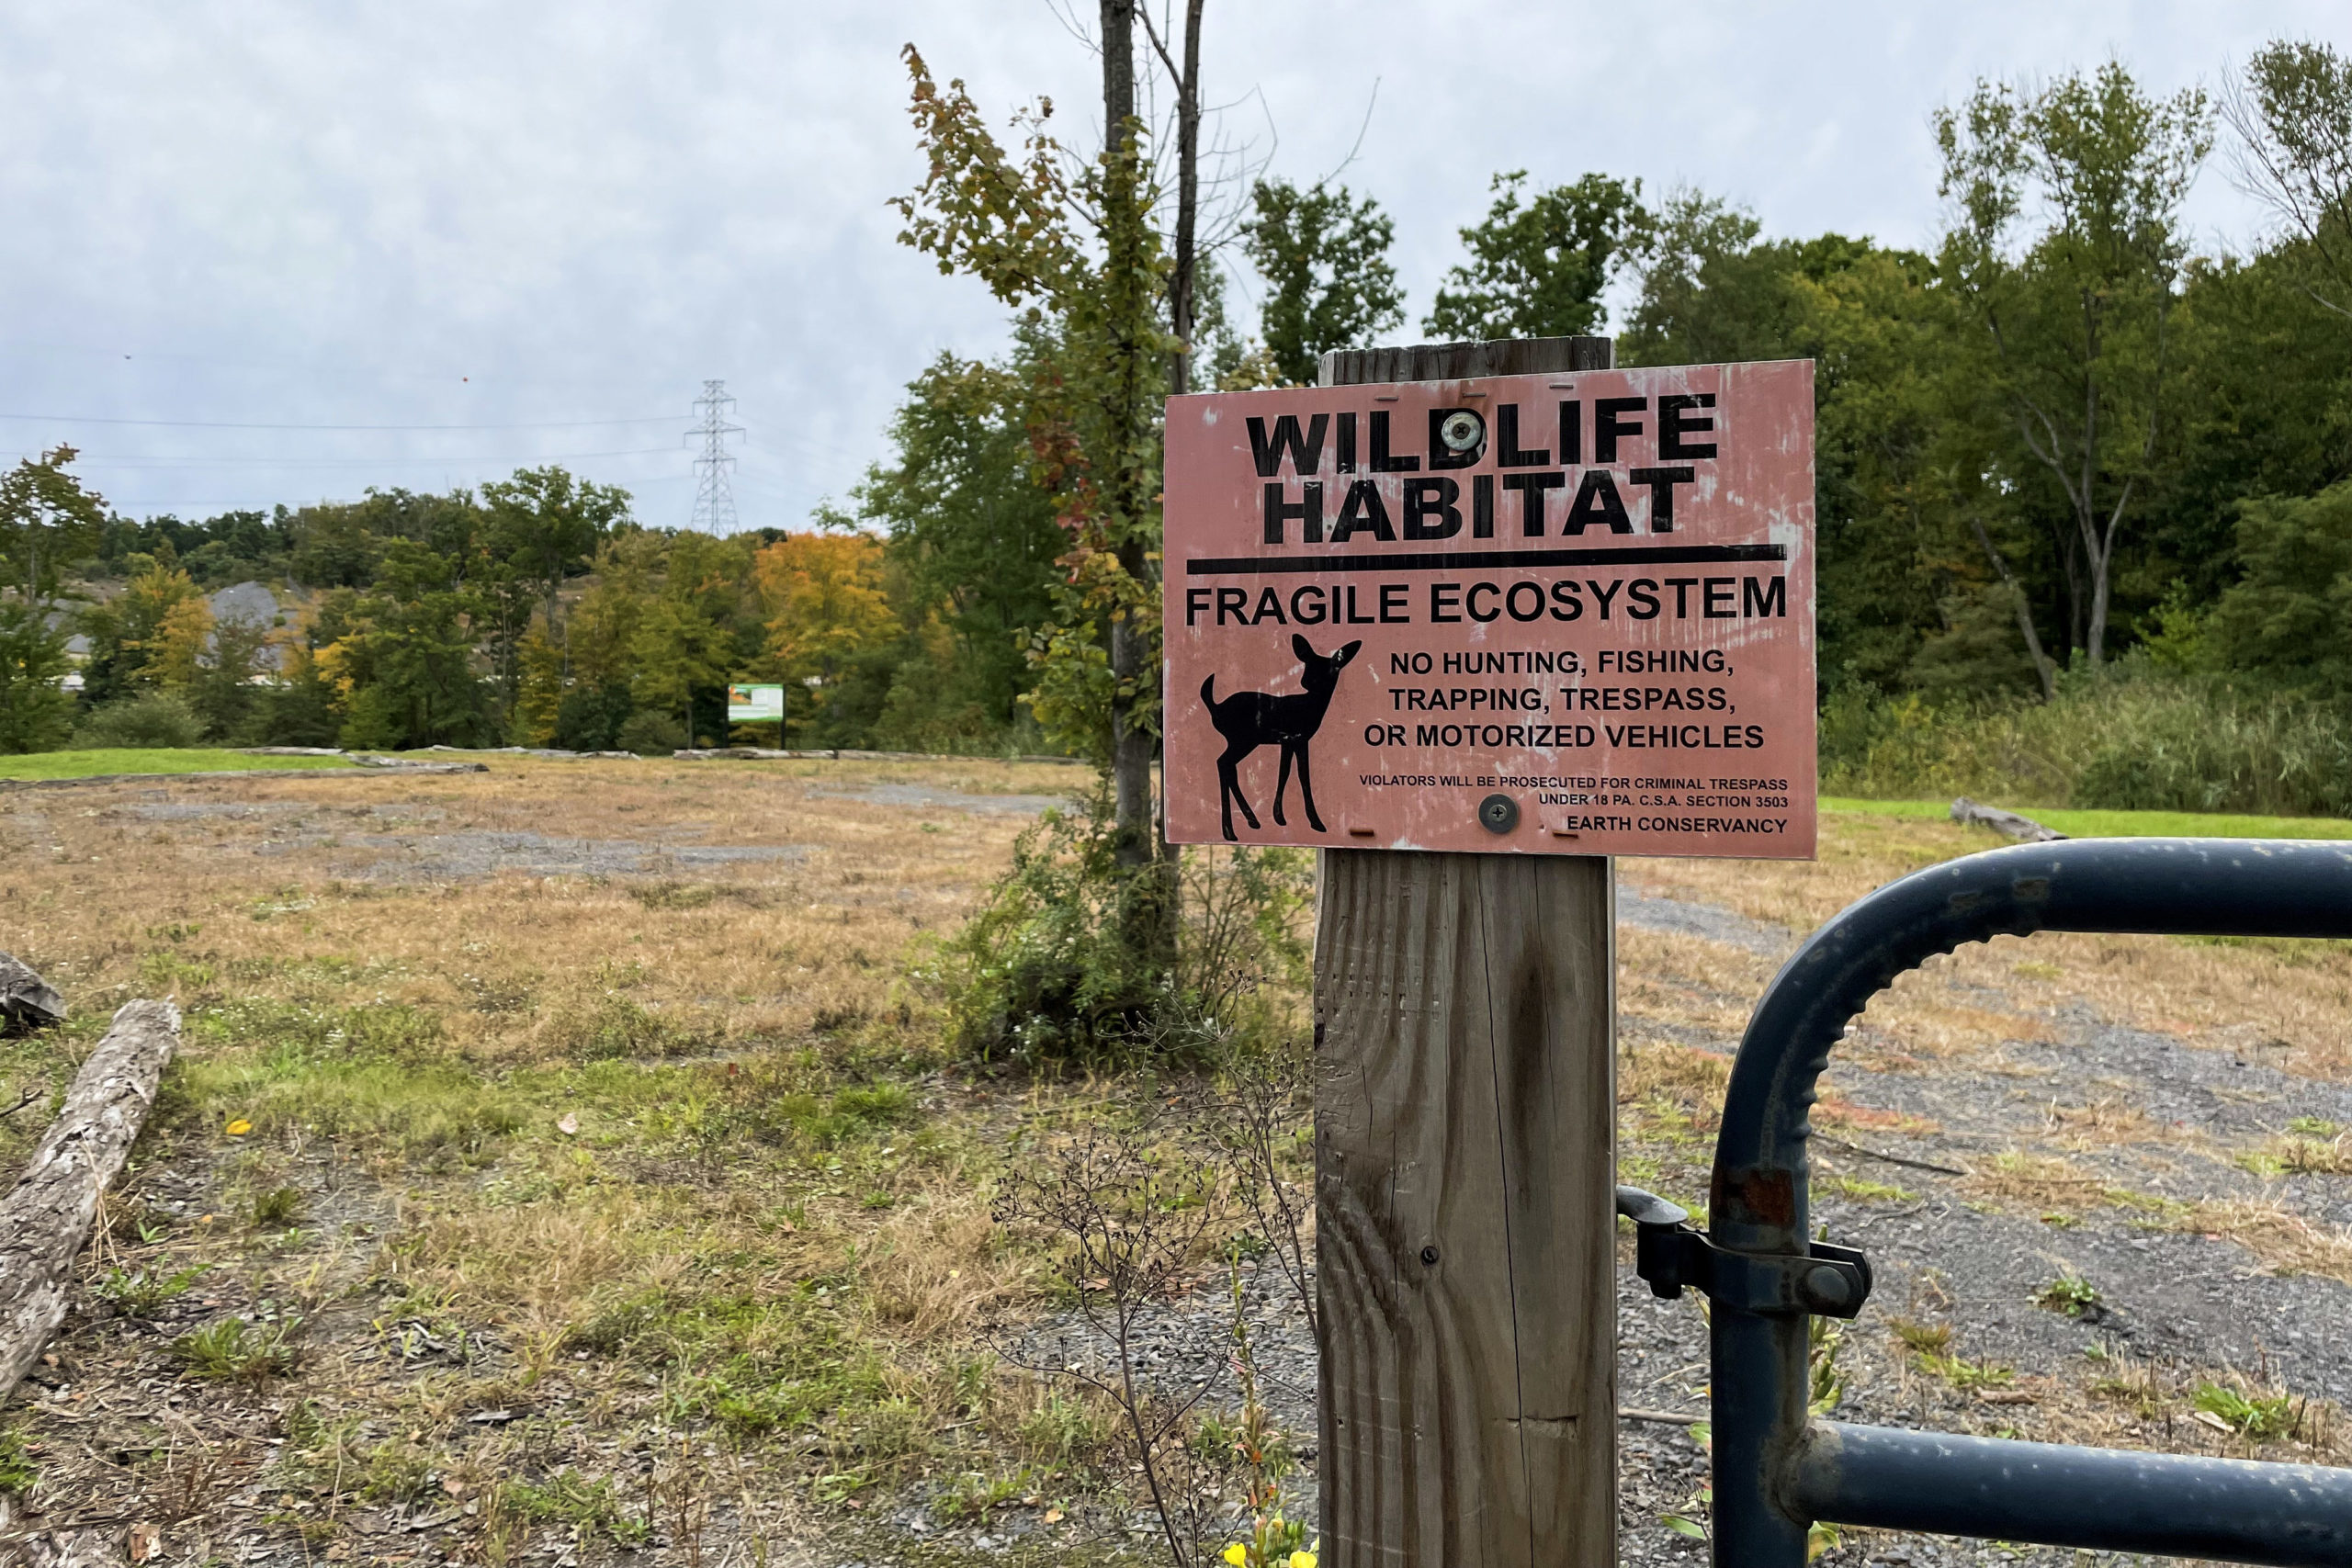 In a rundown field, a sign stands that reads "Wildlife Habitat - Fragile Ecosystem